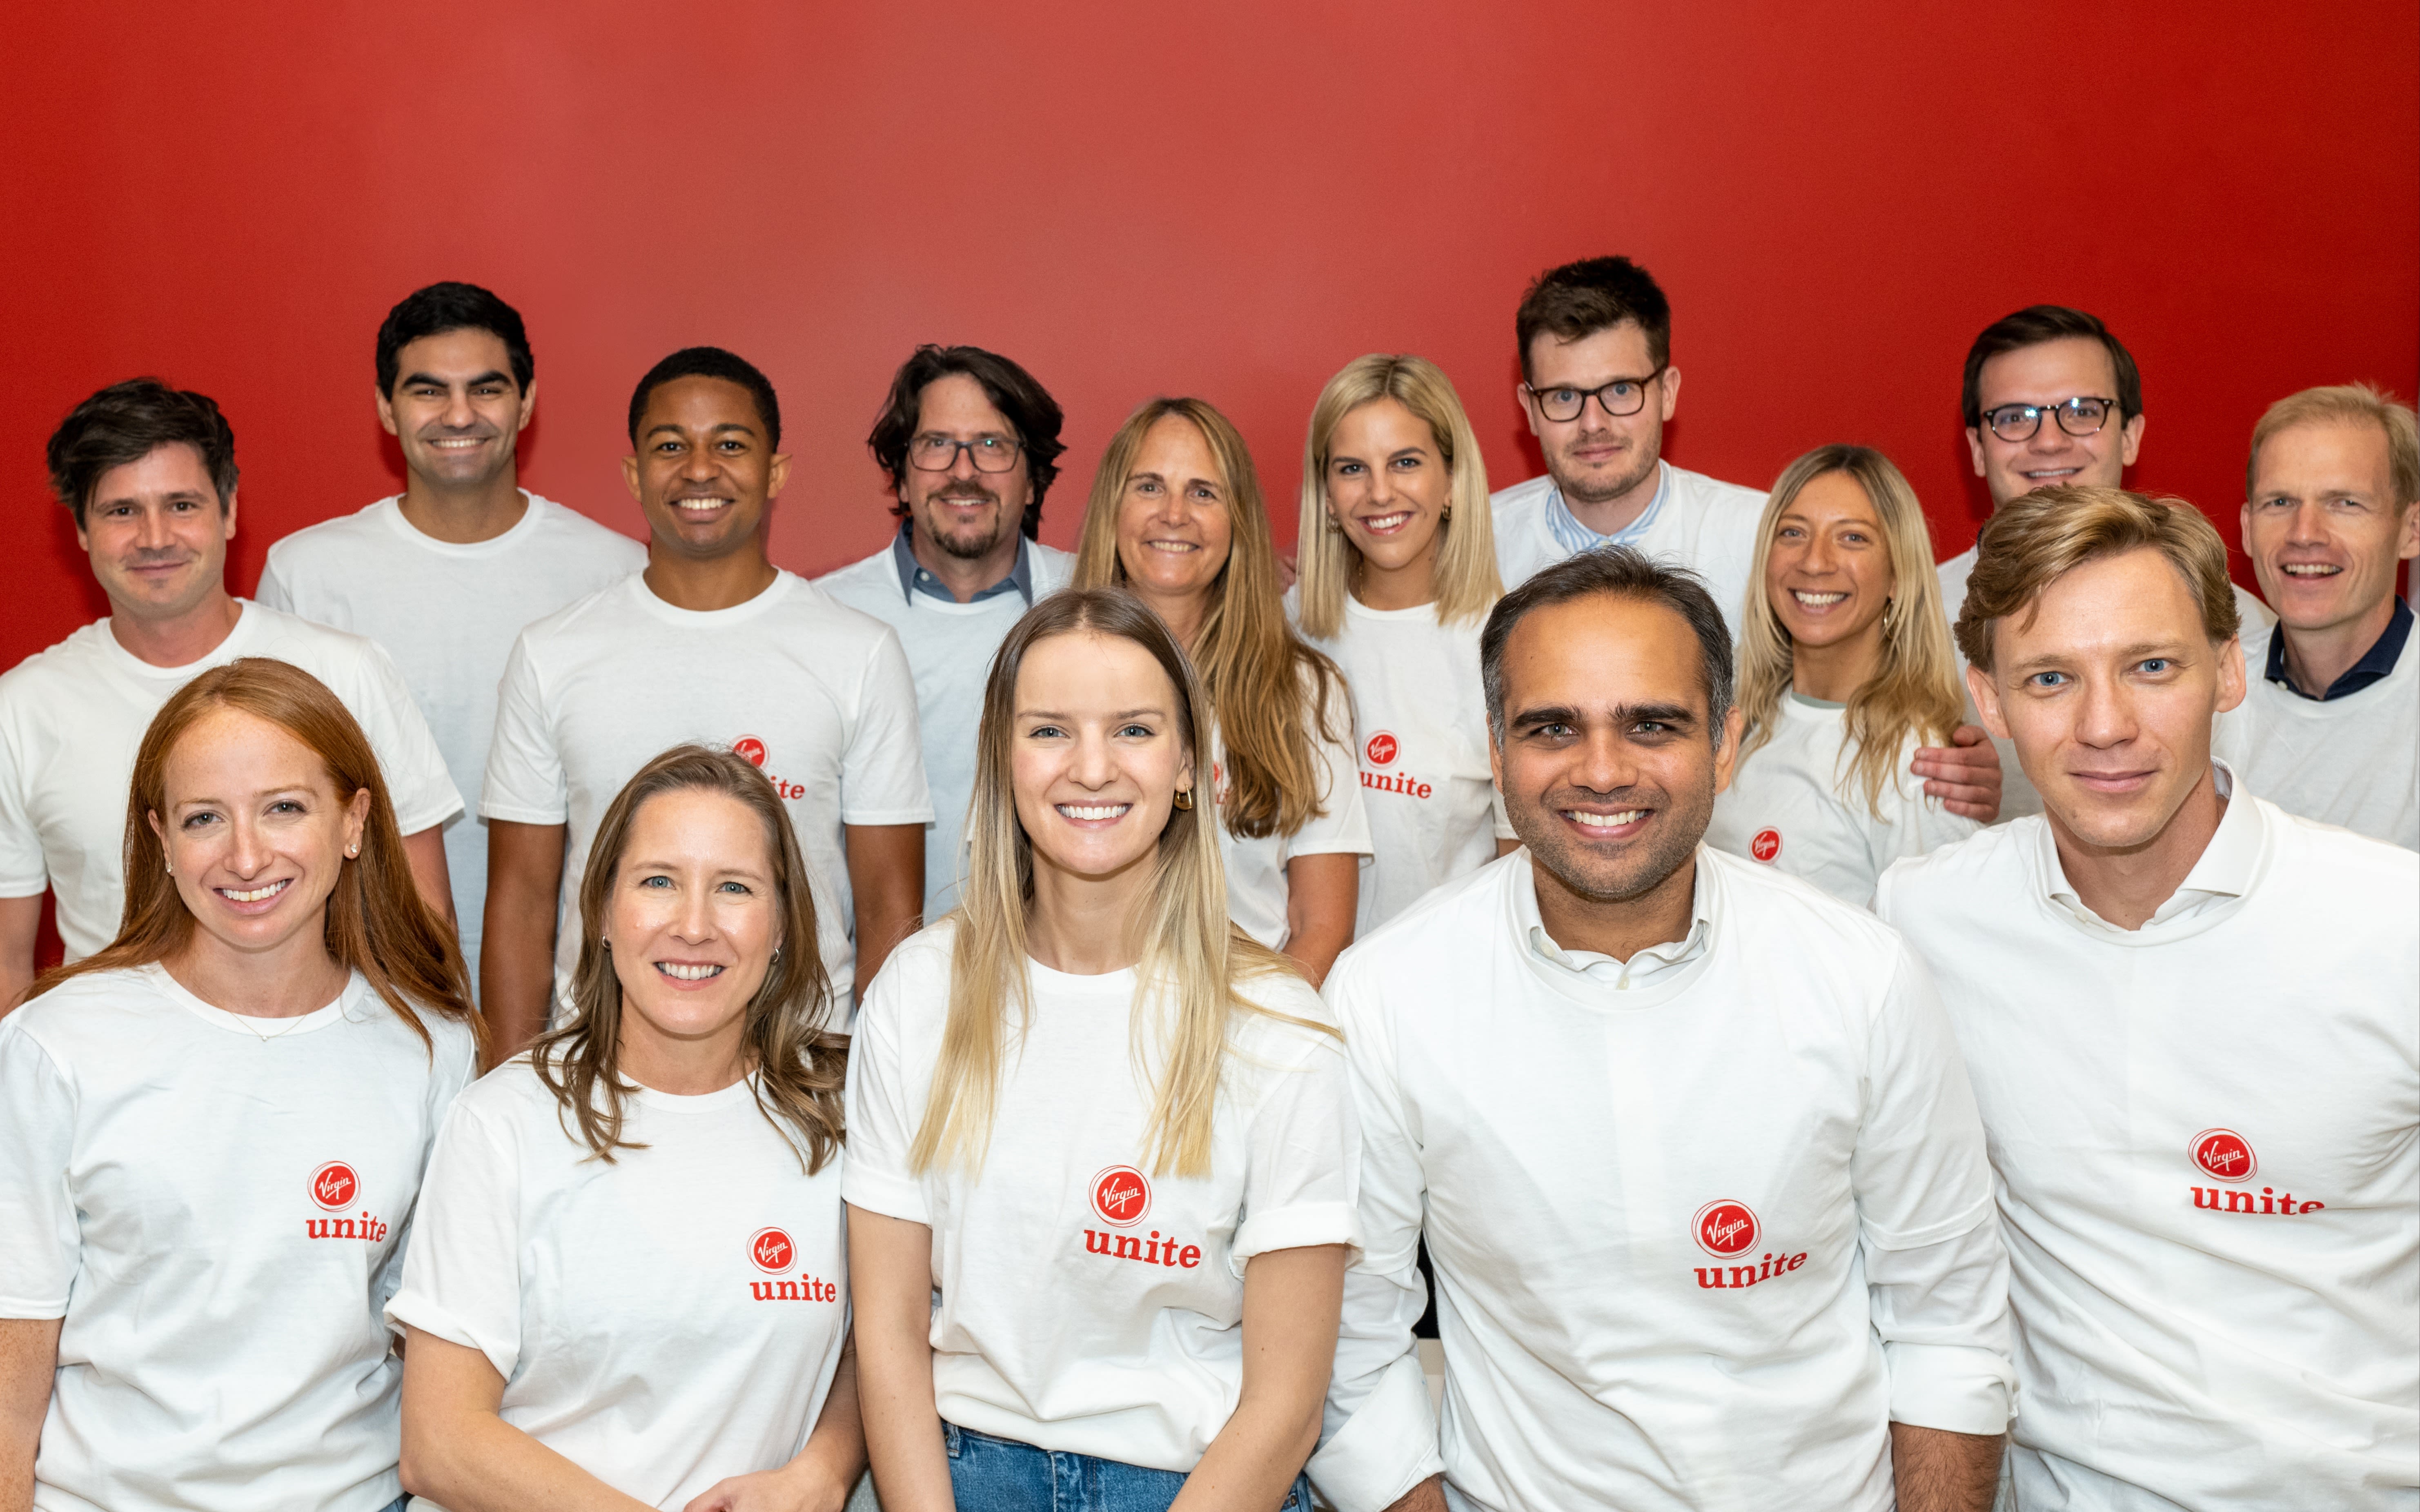 15 Virgin Unite team members wearing white t-shirts with the red Virgin Unite logo on them